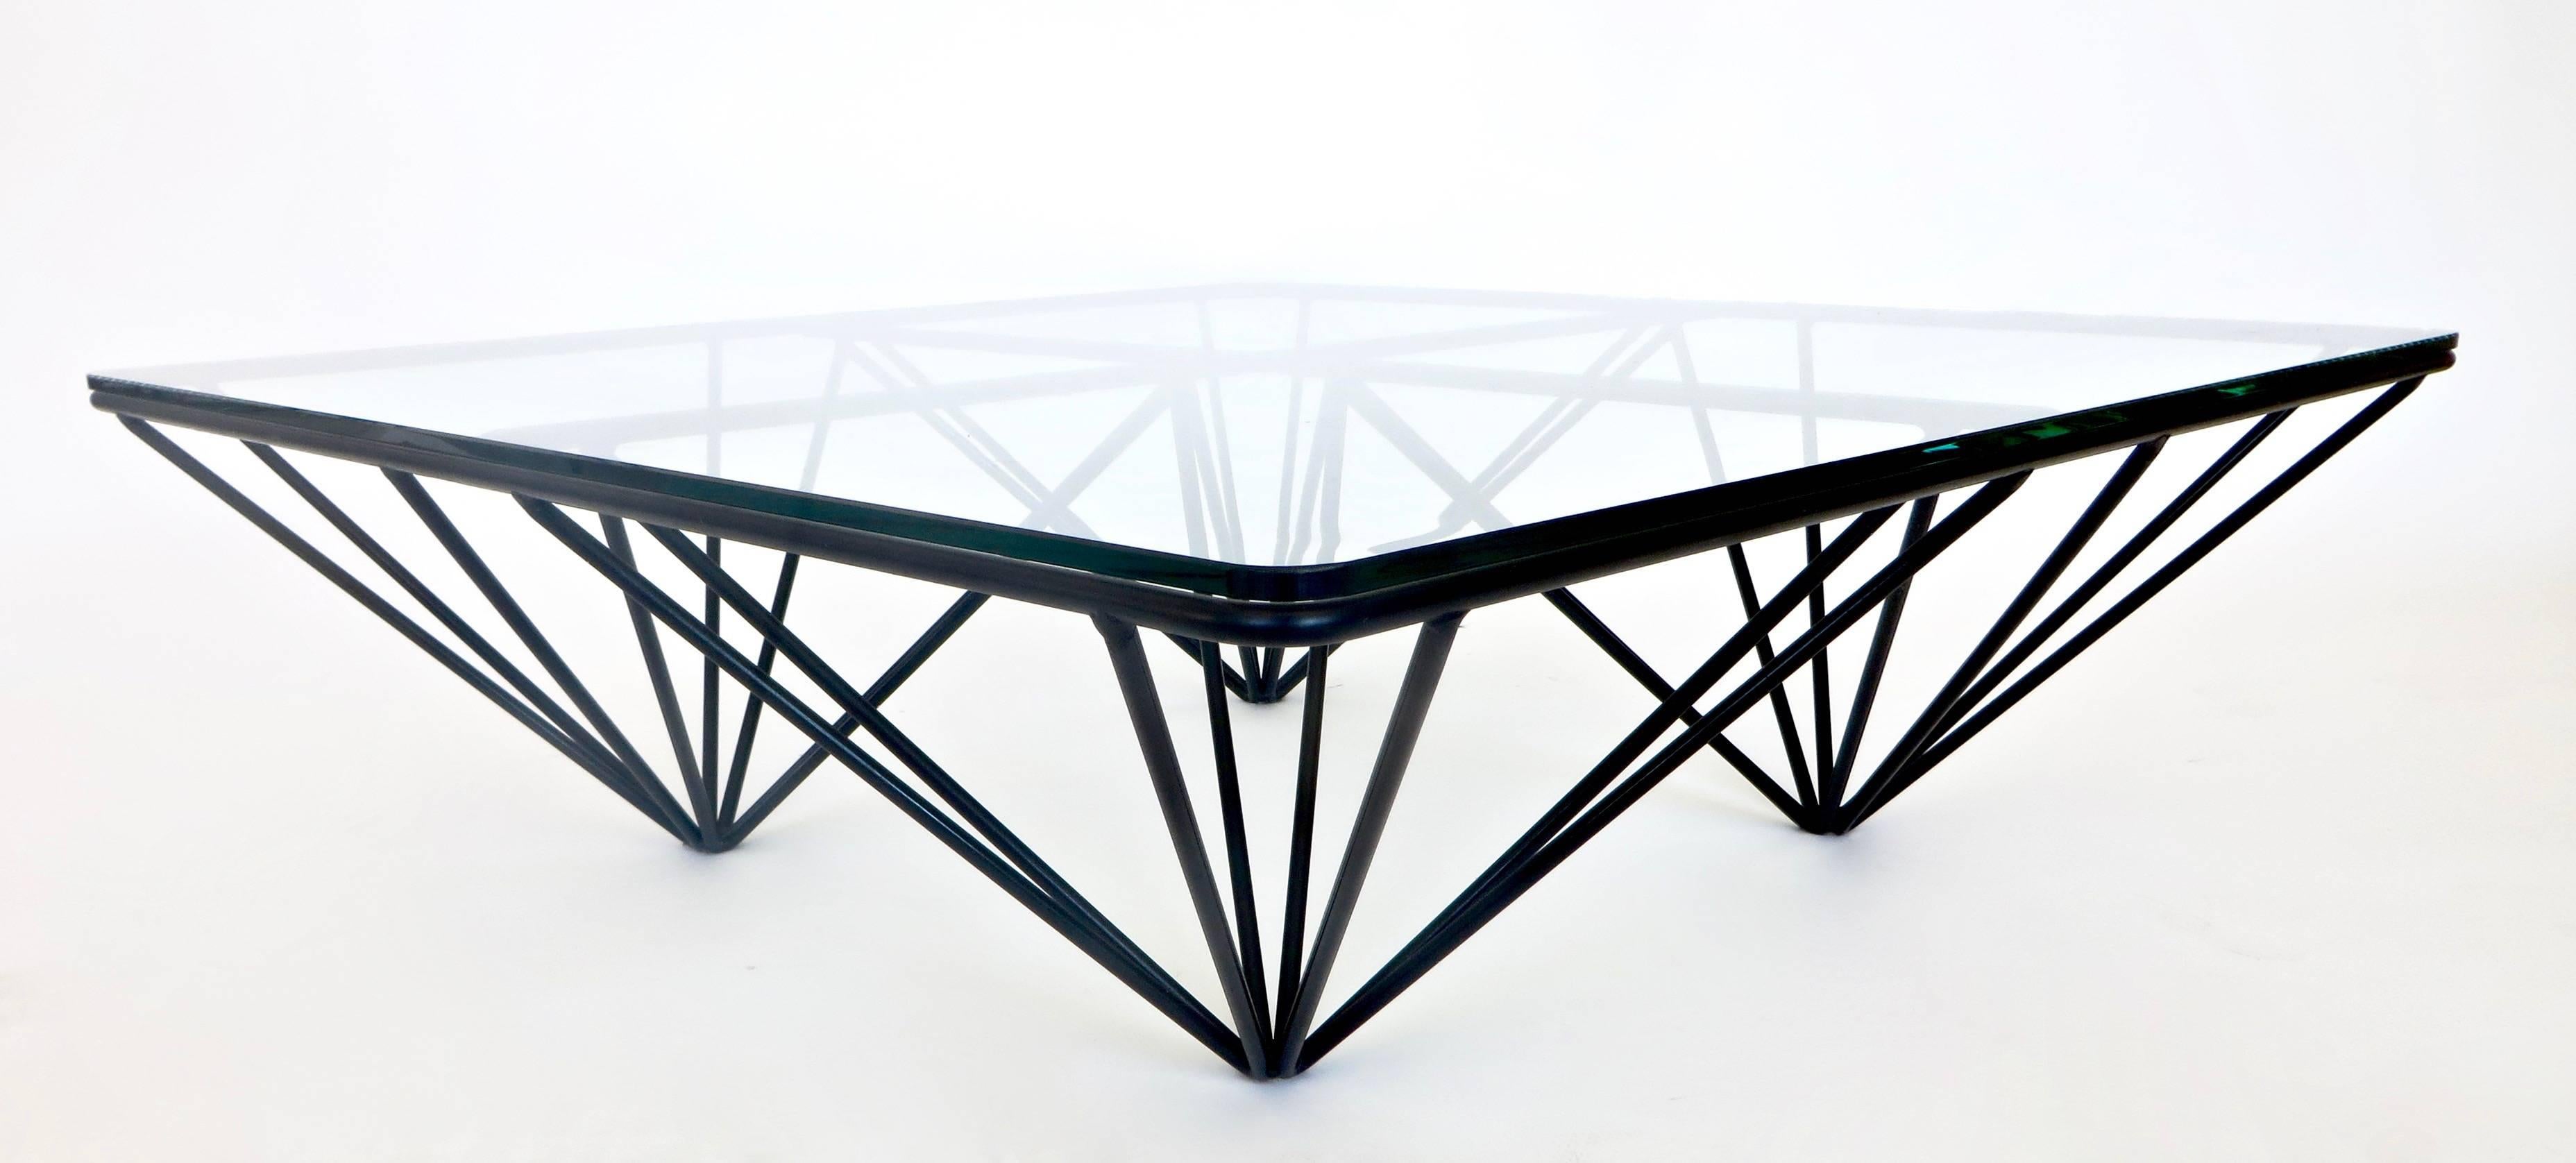 Late 20th Century Low Square Black Steel Italian Coffee Table in the Style of Paolo Piva